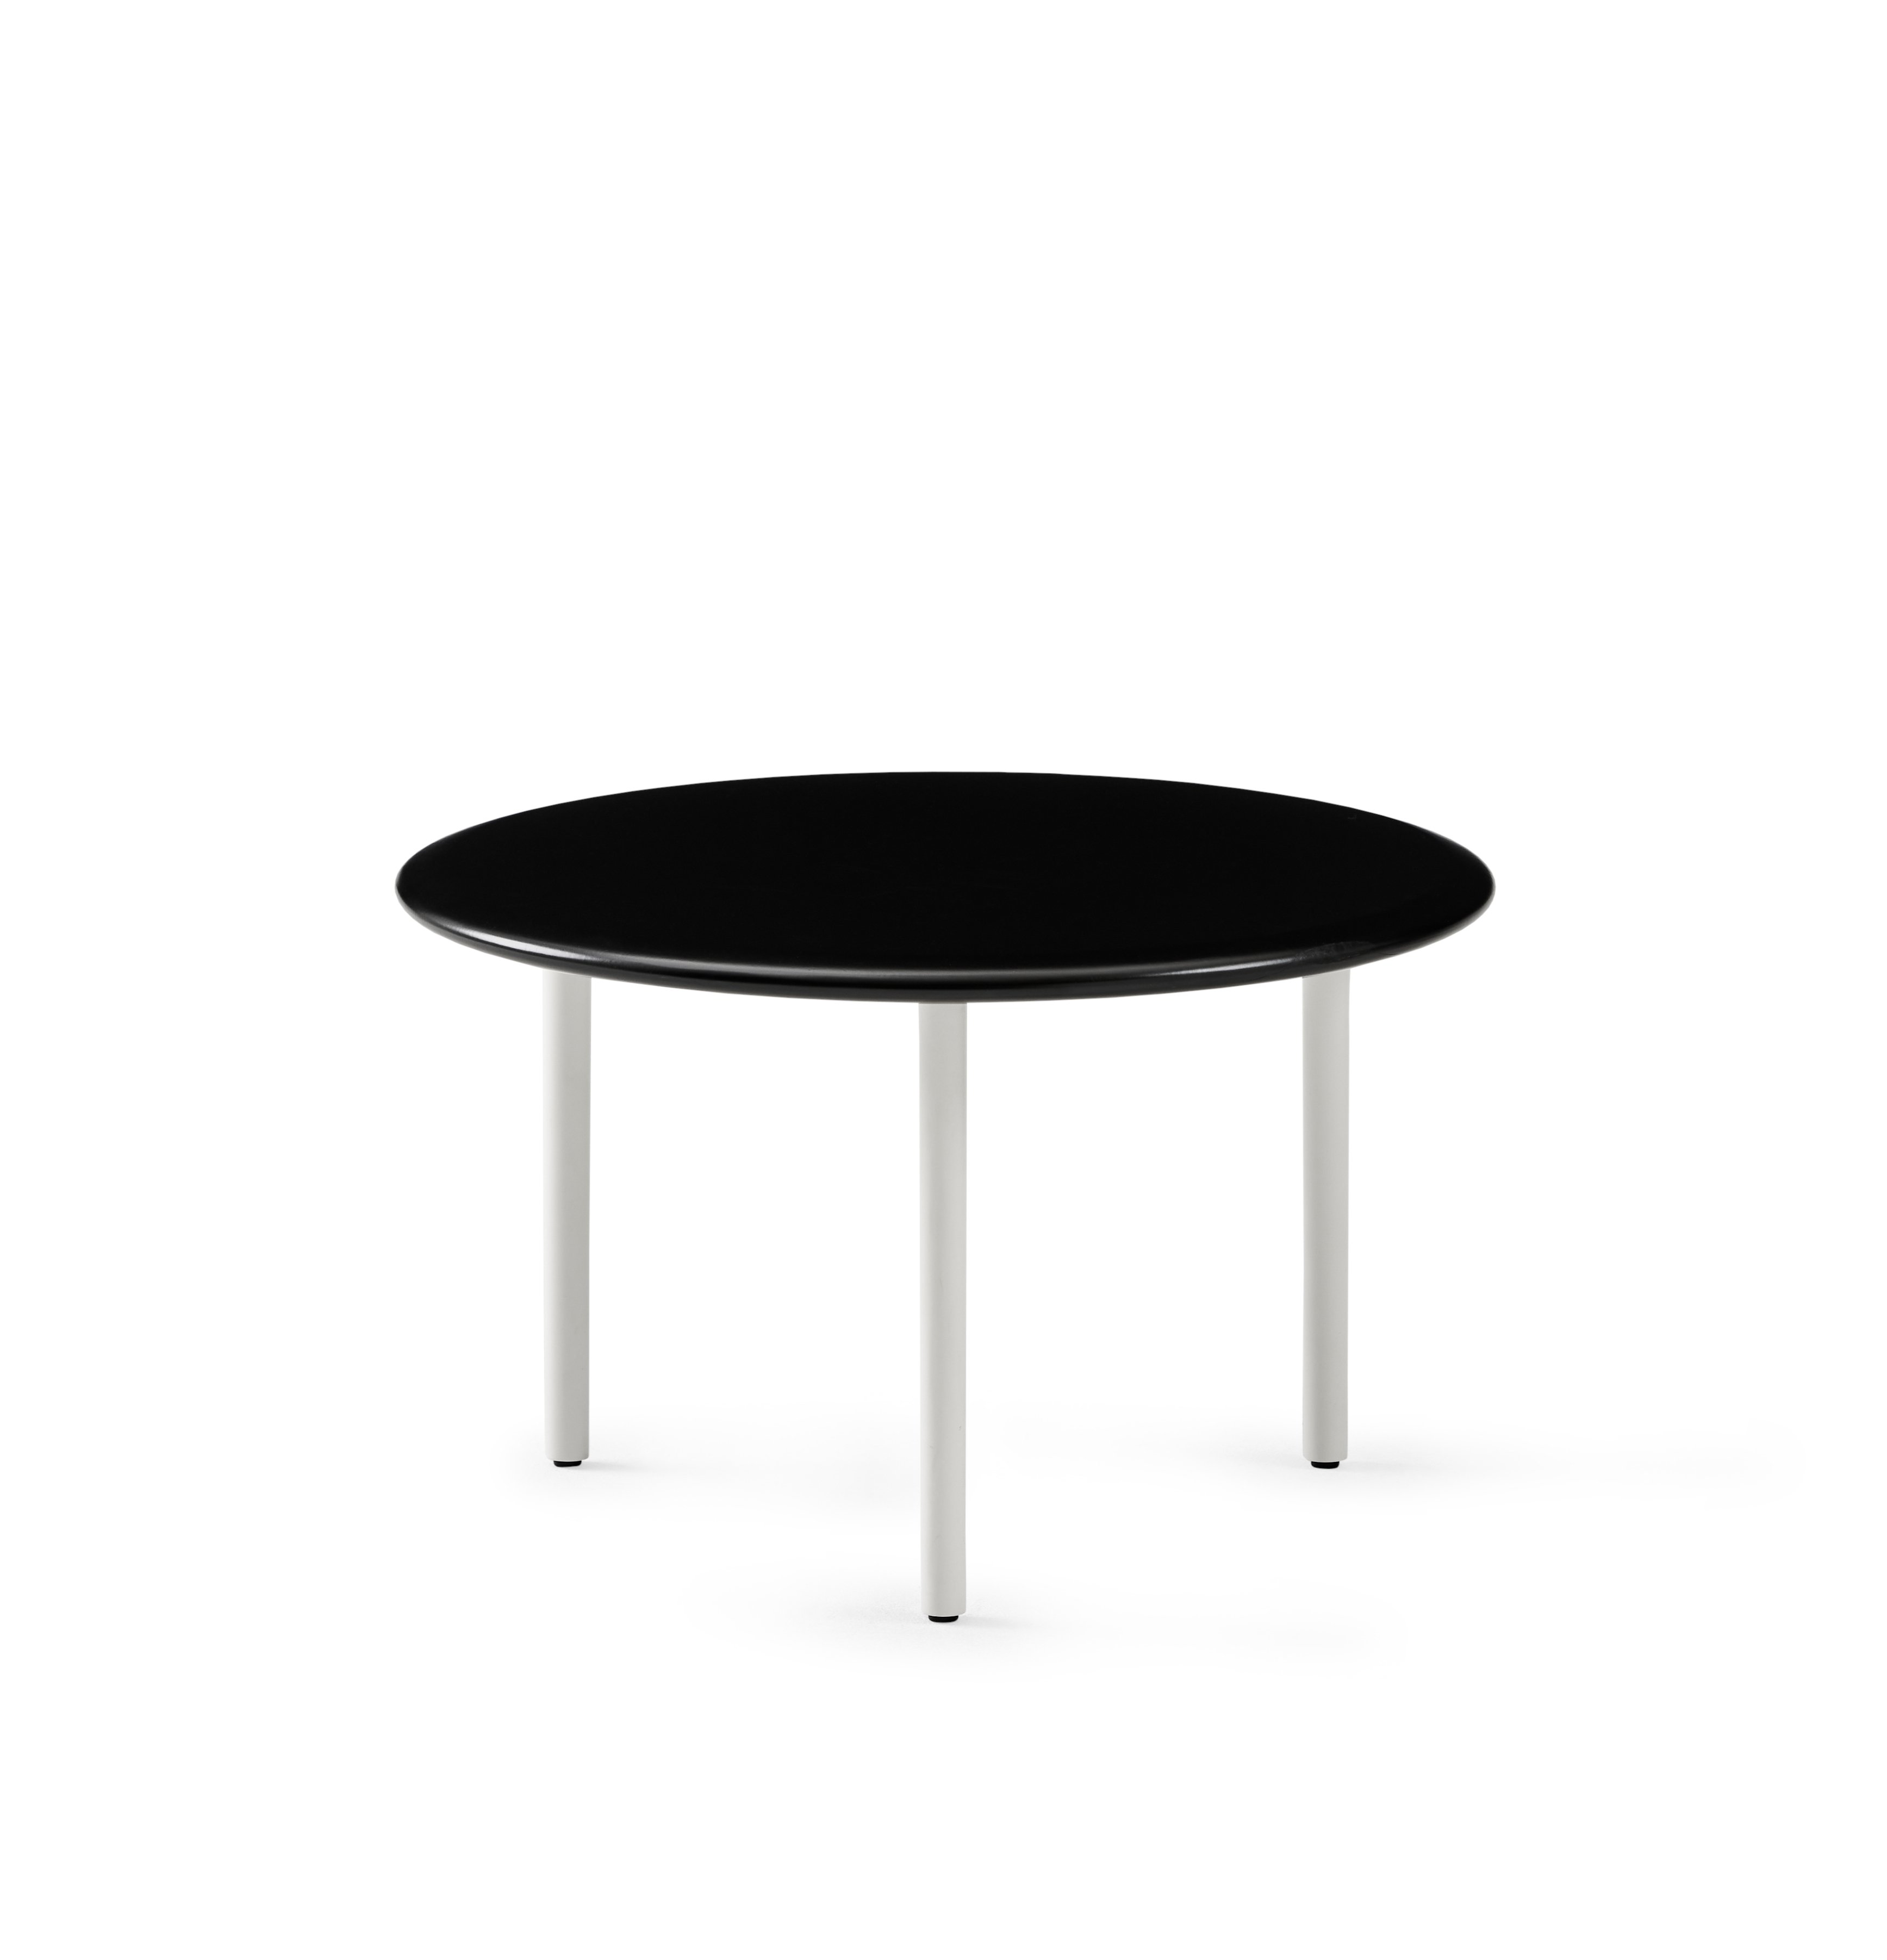 Detail front shot of Large Sprig Table with Black top and White base